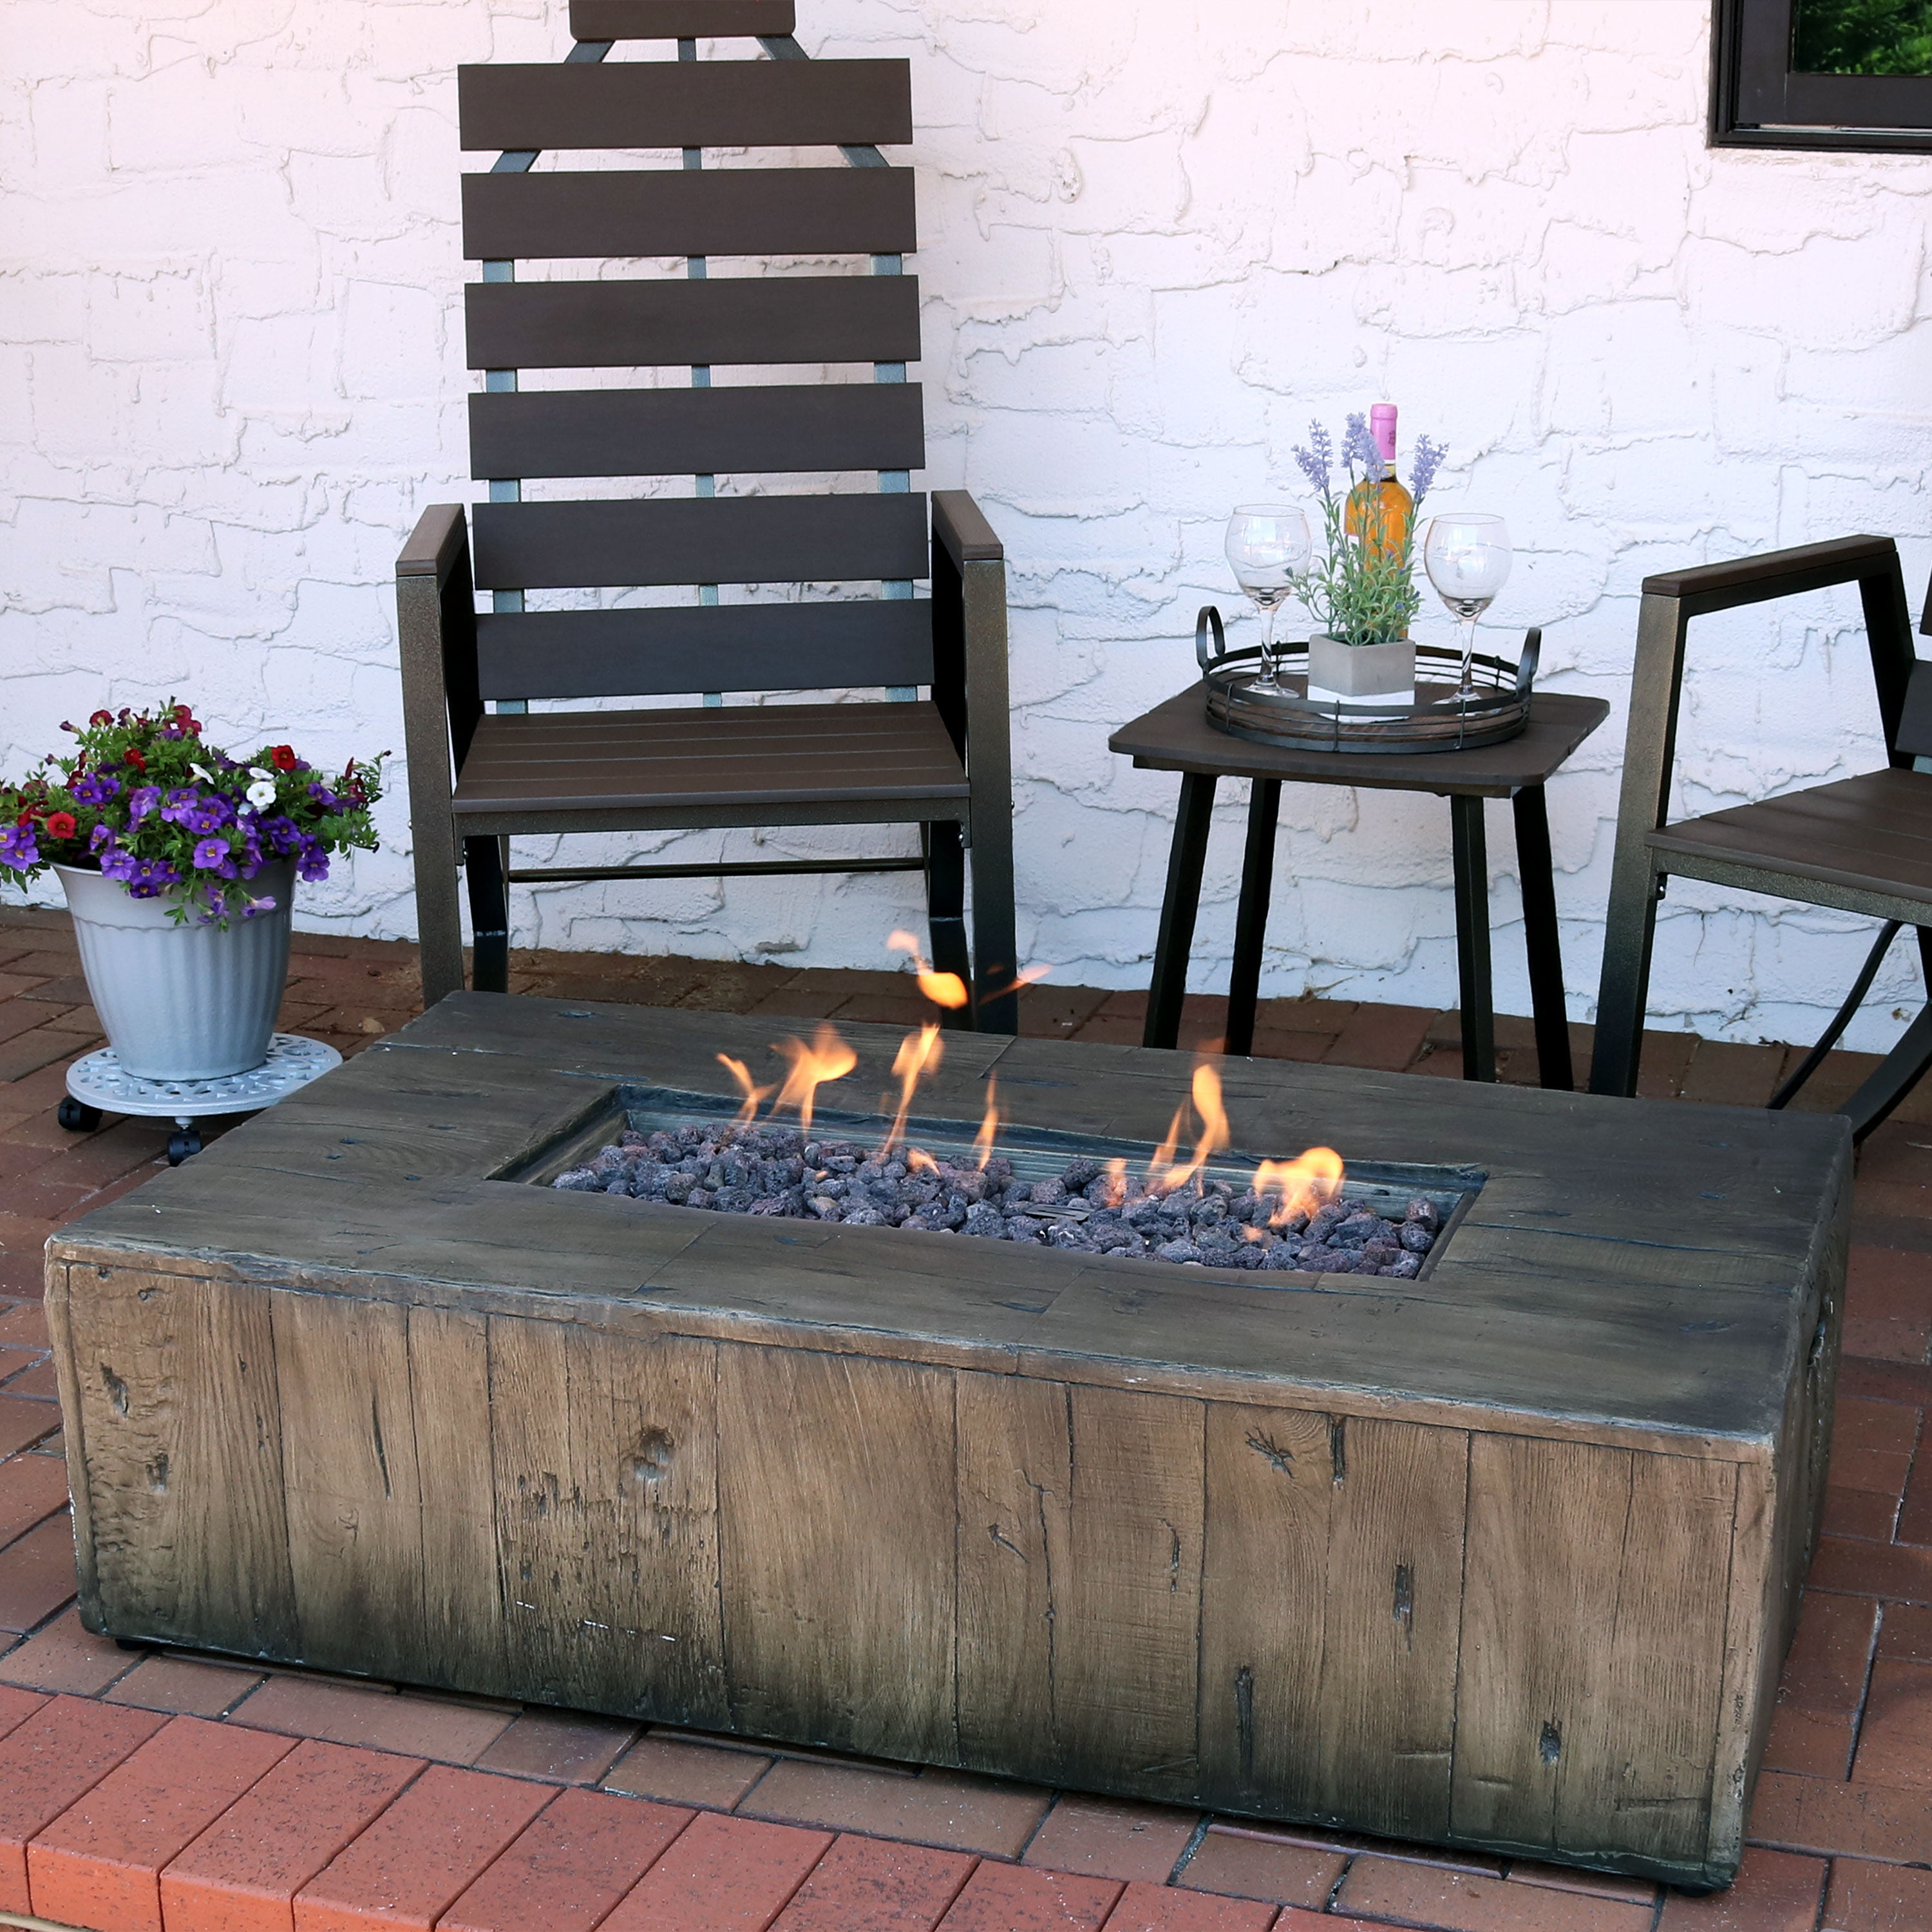 Sunnydaze Rustic Propane Gas Fire Pit Table With Outdoor Weather Resistant Durable Cover And Lava Rocks Faux Wood Patio 48 Inch Com - Patio Fire Table Wood